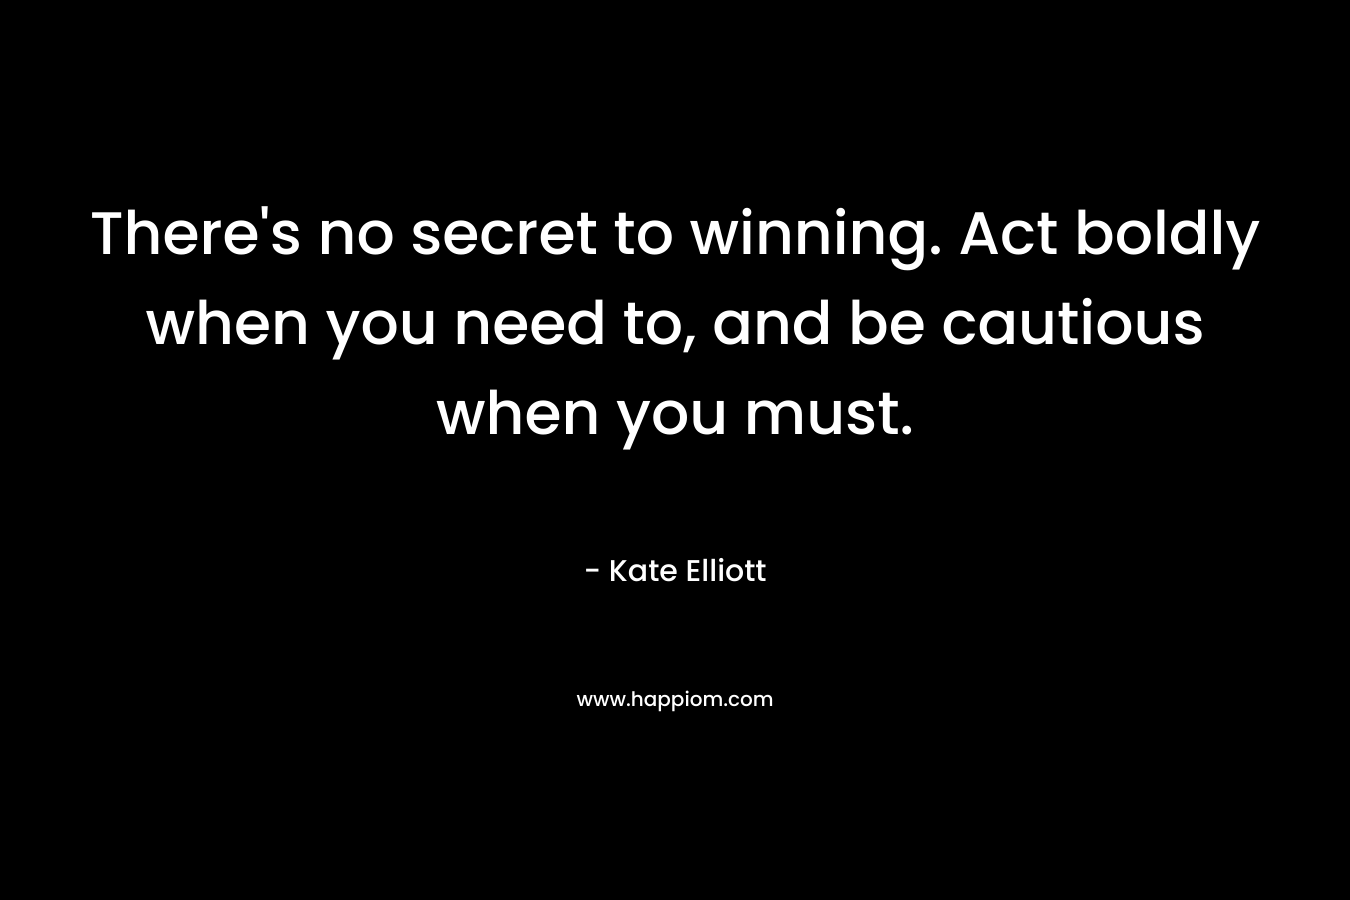 There's no secret to winning. Act boldly when you need to, and be cautious when you must.